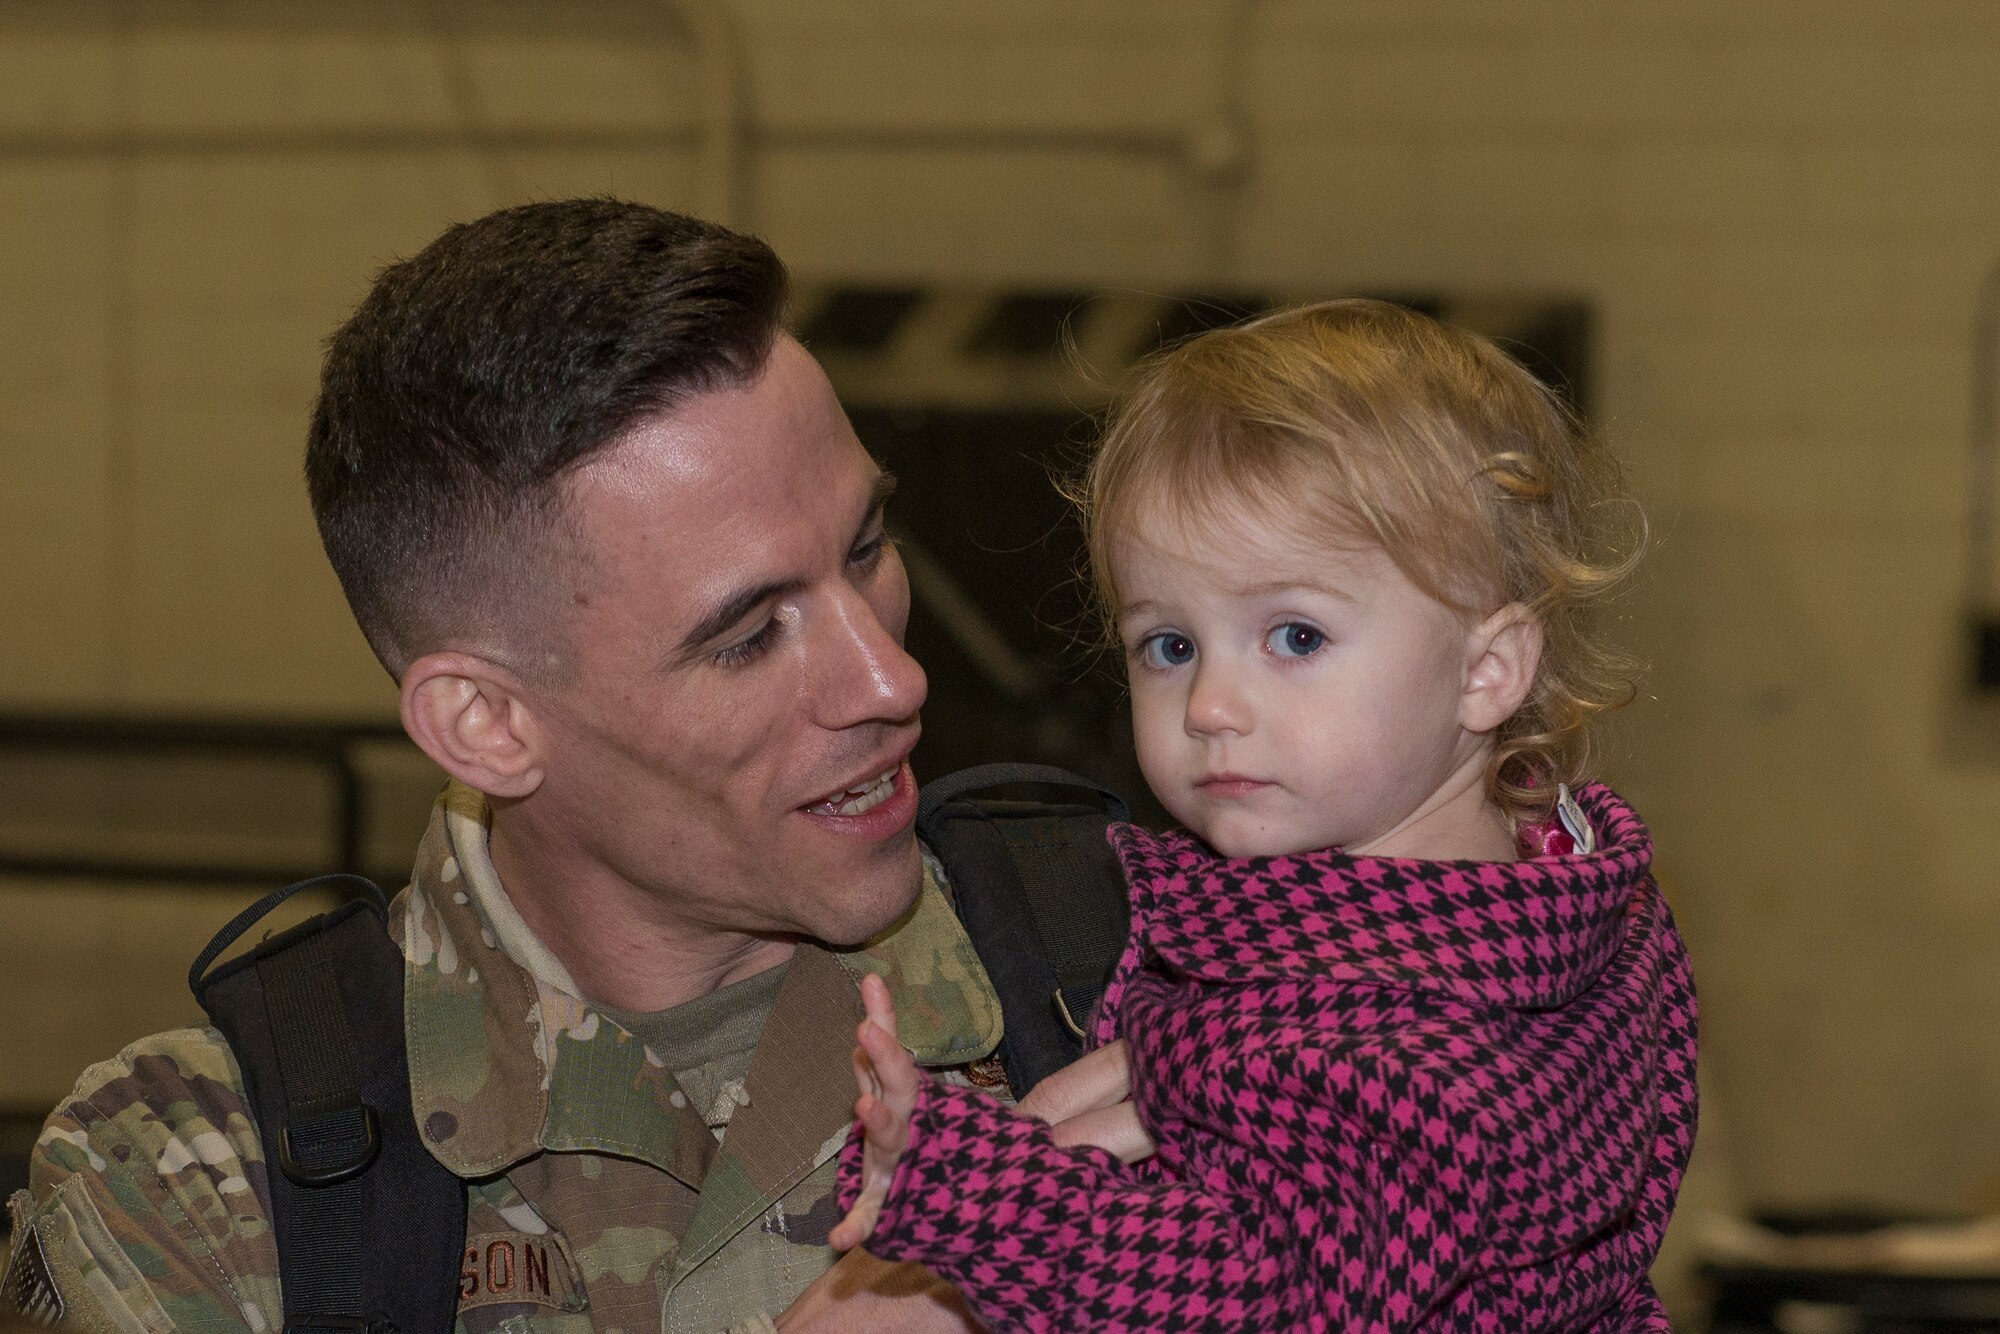 An Airman from the 726th Air Control Squadron returns from deployment and holds his child, October 27, 2018, at Mountain Home Air Force Base, Idaho. 120 Airmen from the 726th ACS deployed with mission of supporting communication between air craft and ground units. (U.S. Air Force photo by Senior Airman Tyrell Hall)